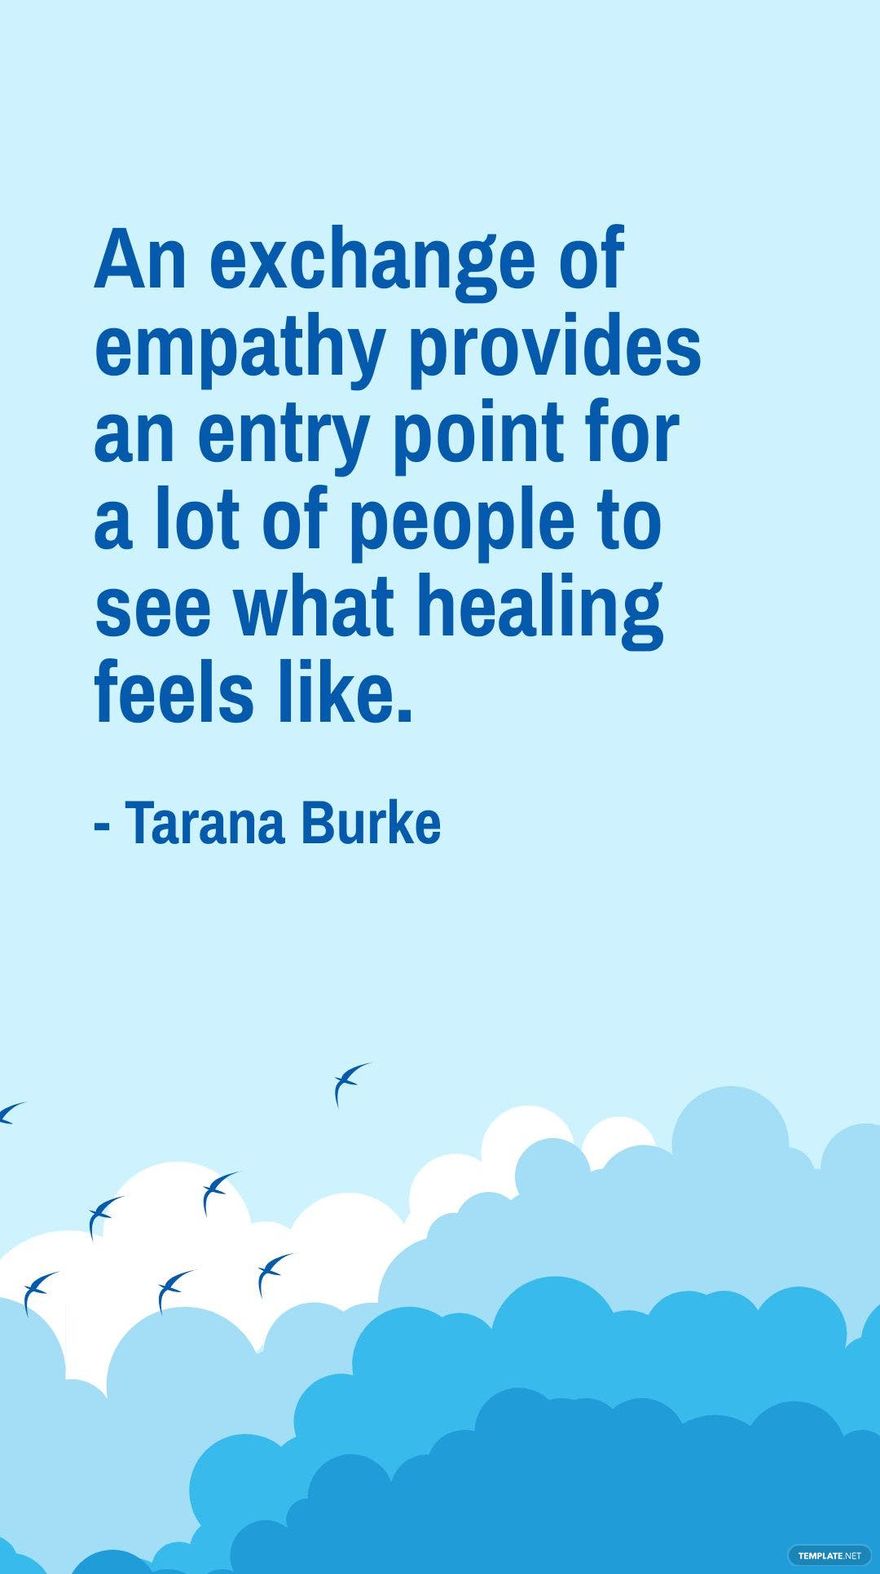 Free Tarana Burke - An exchange of empathy provides an entry point for a lot of people to see what healing feels like. in JPG